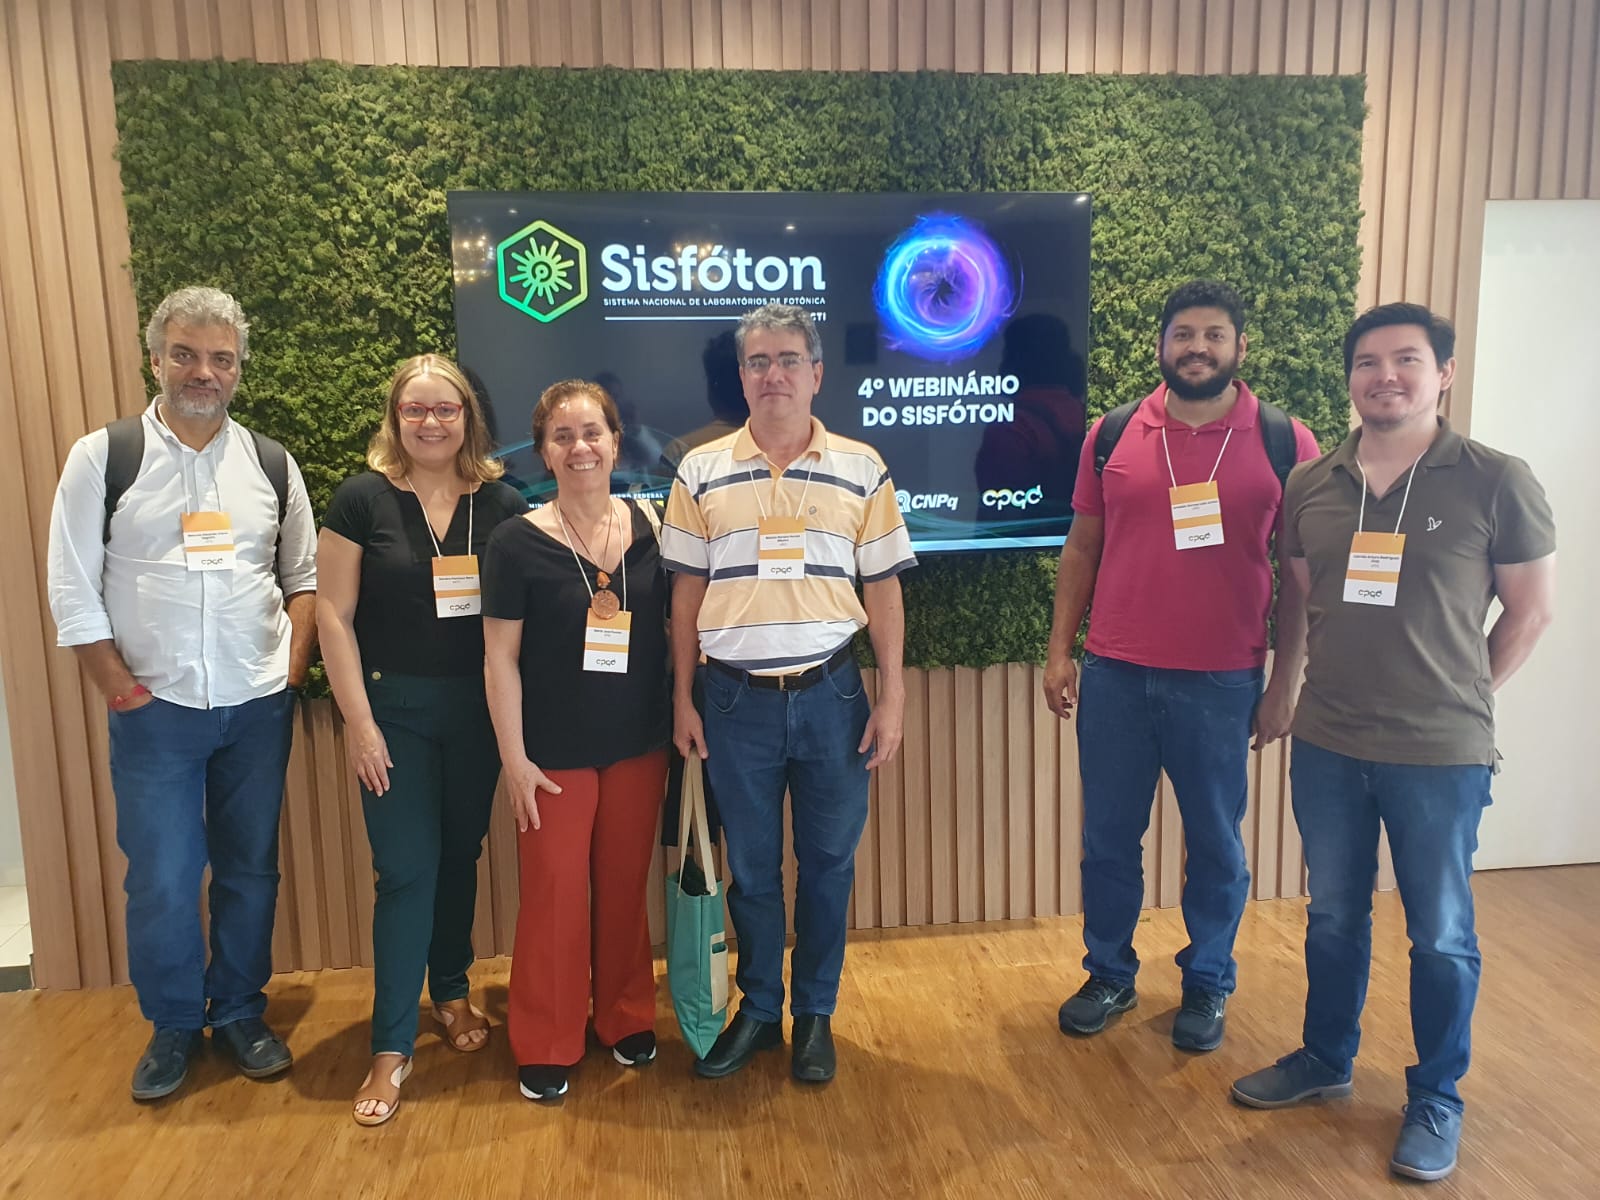 Ufes professors participate in the largest photonics event in Brazil